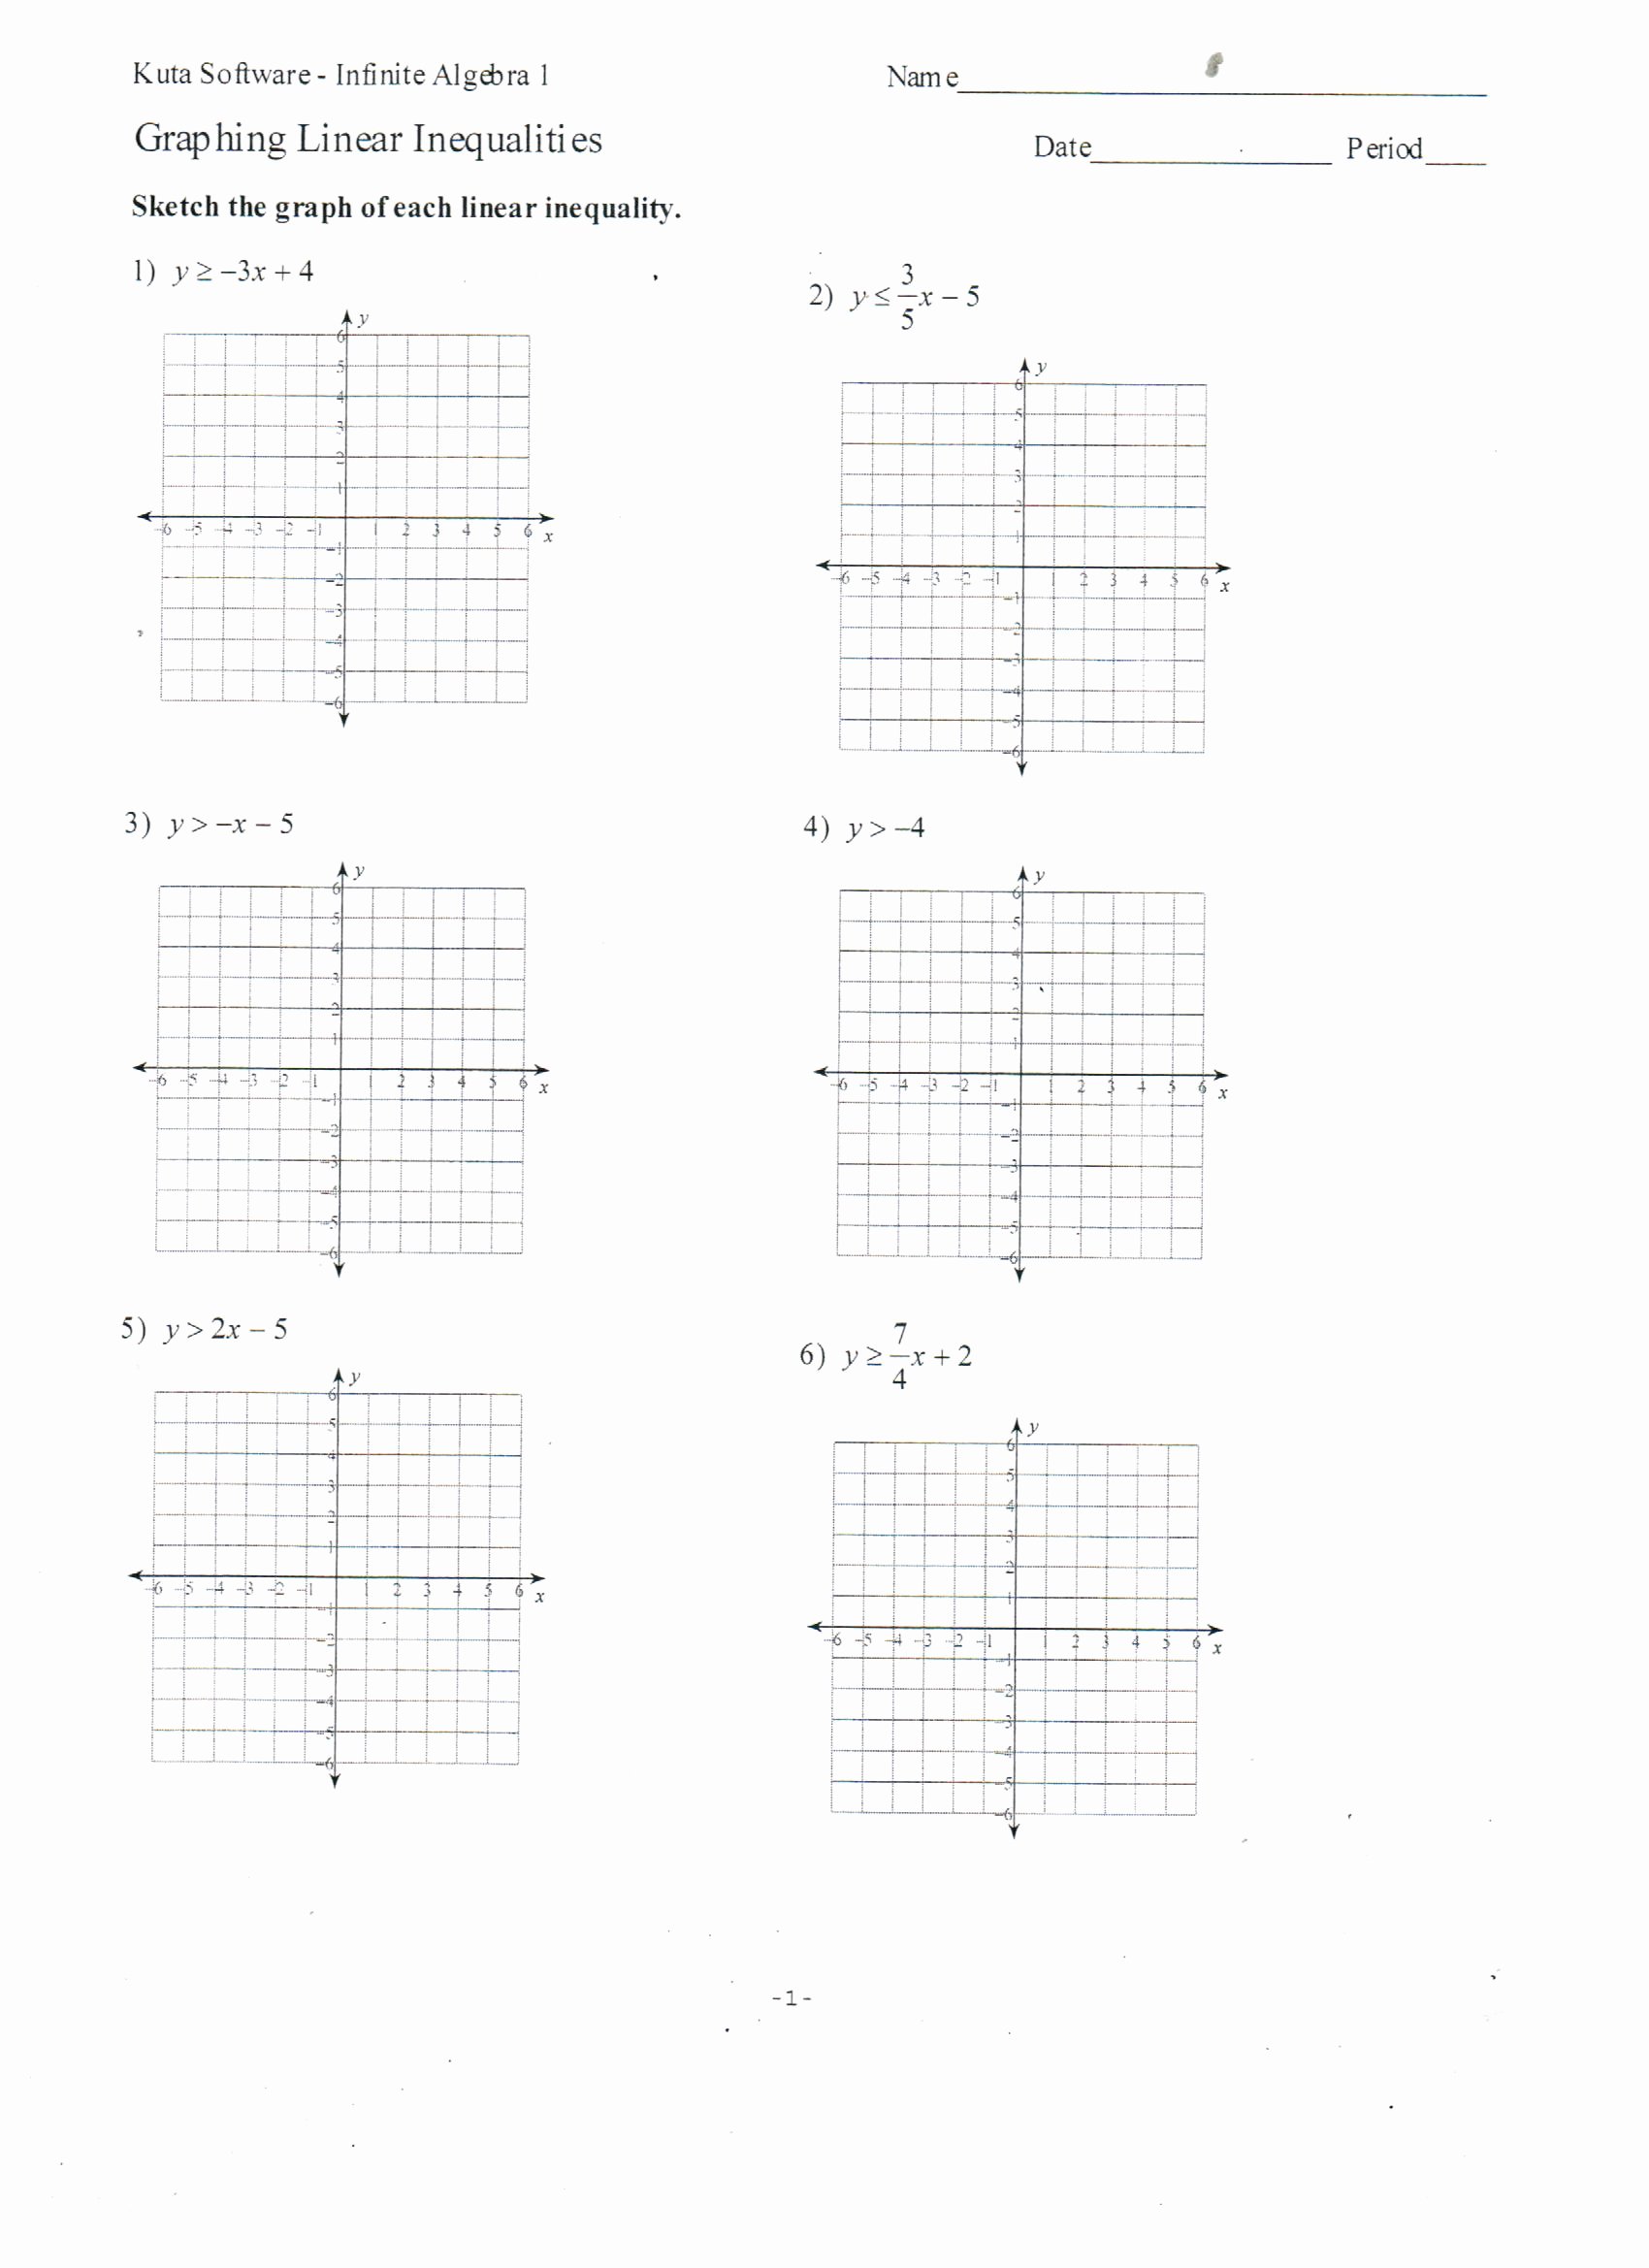 Graphing Linear Functions Worksheet Luxury Graphing Linear Inequalities Worksheet Doc